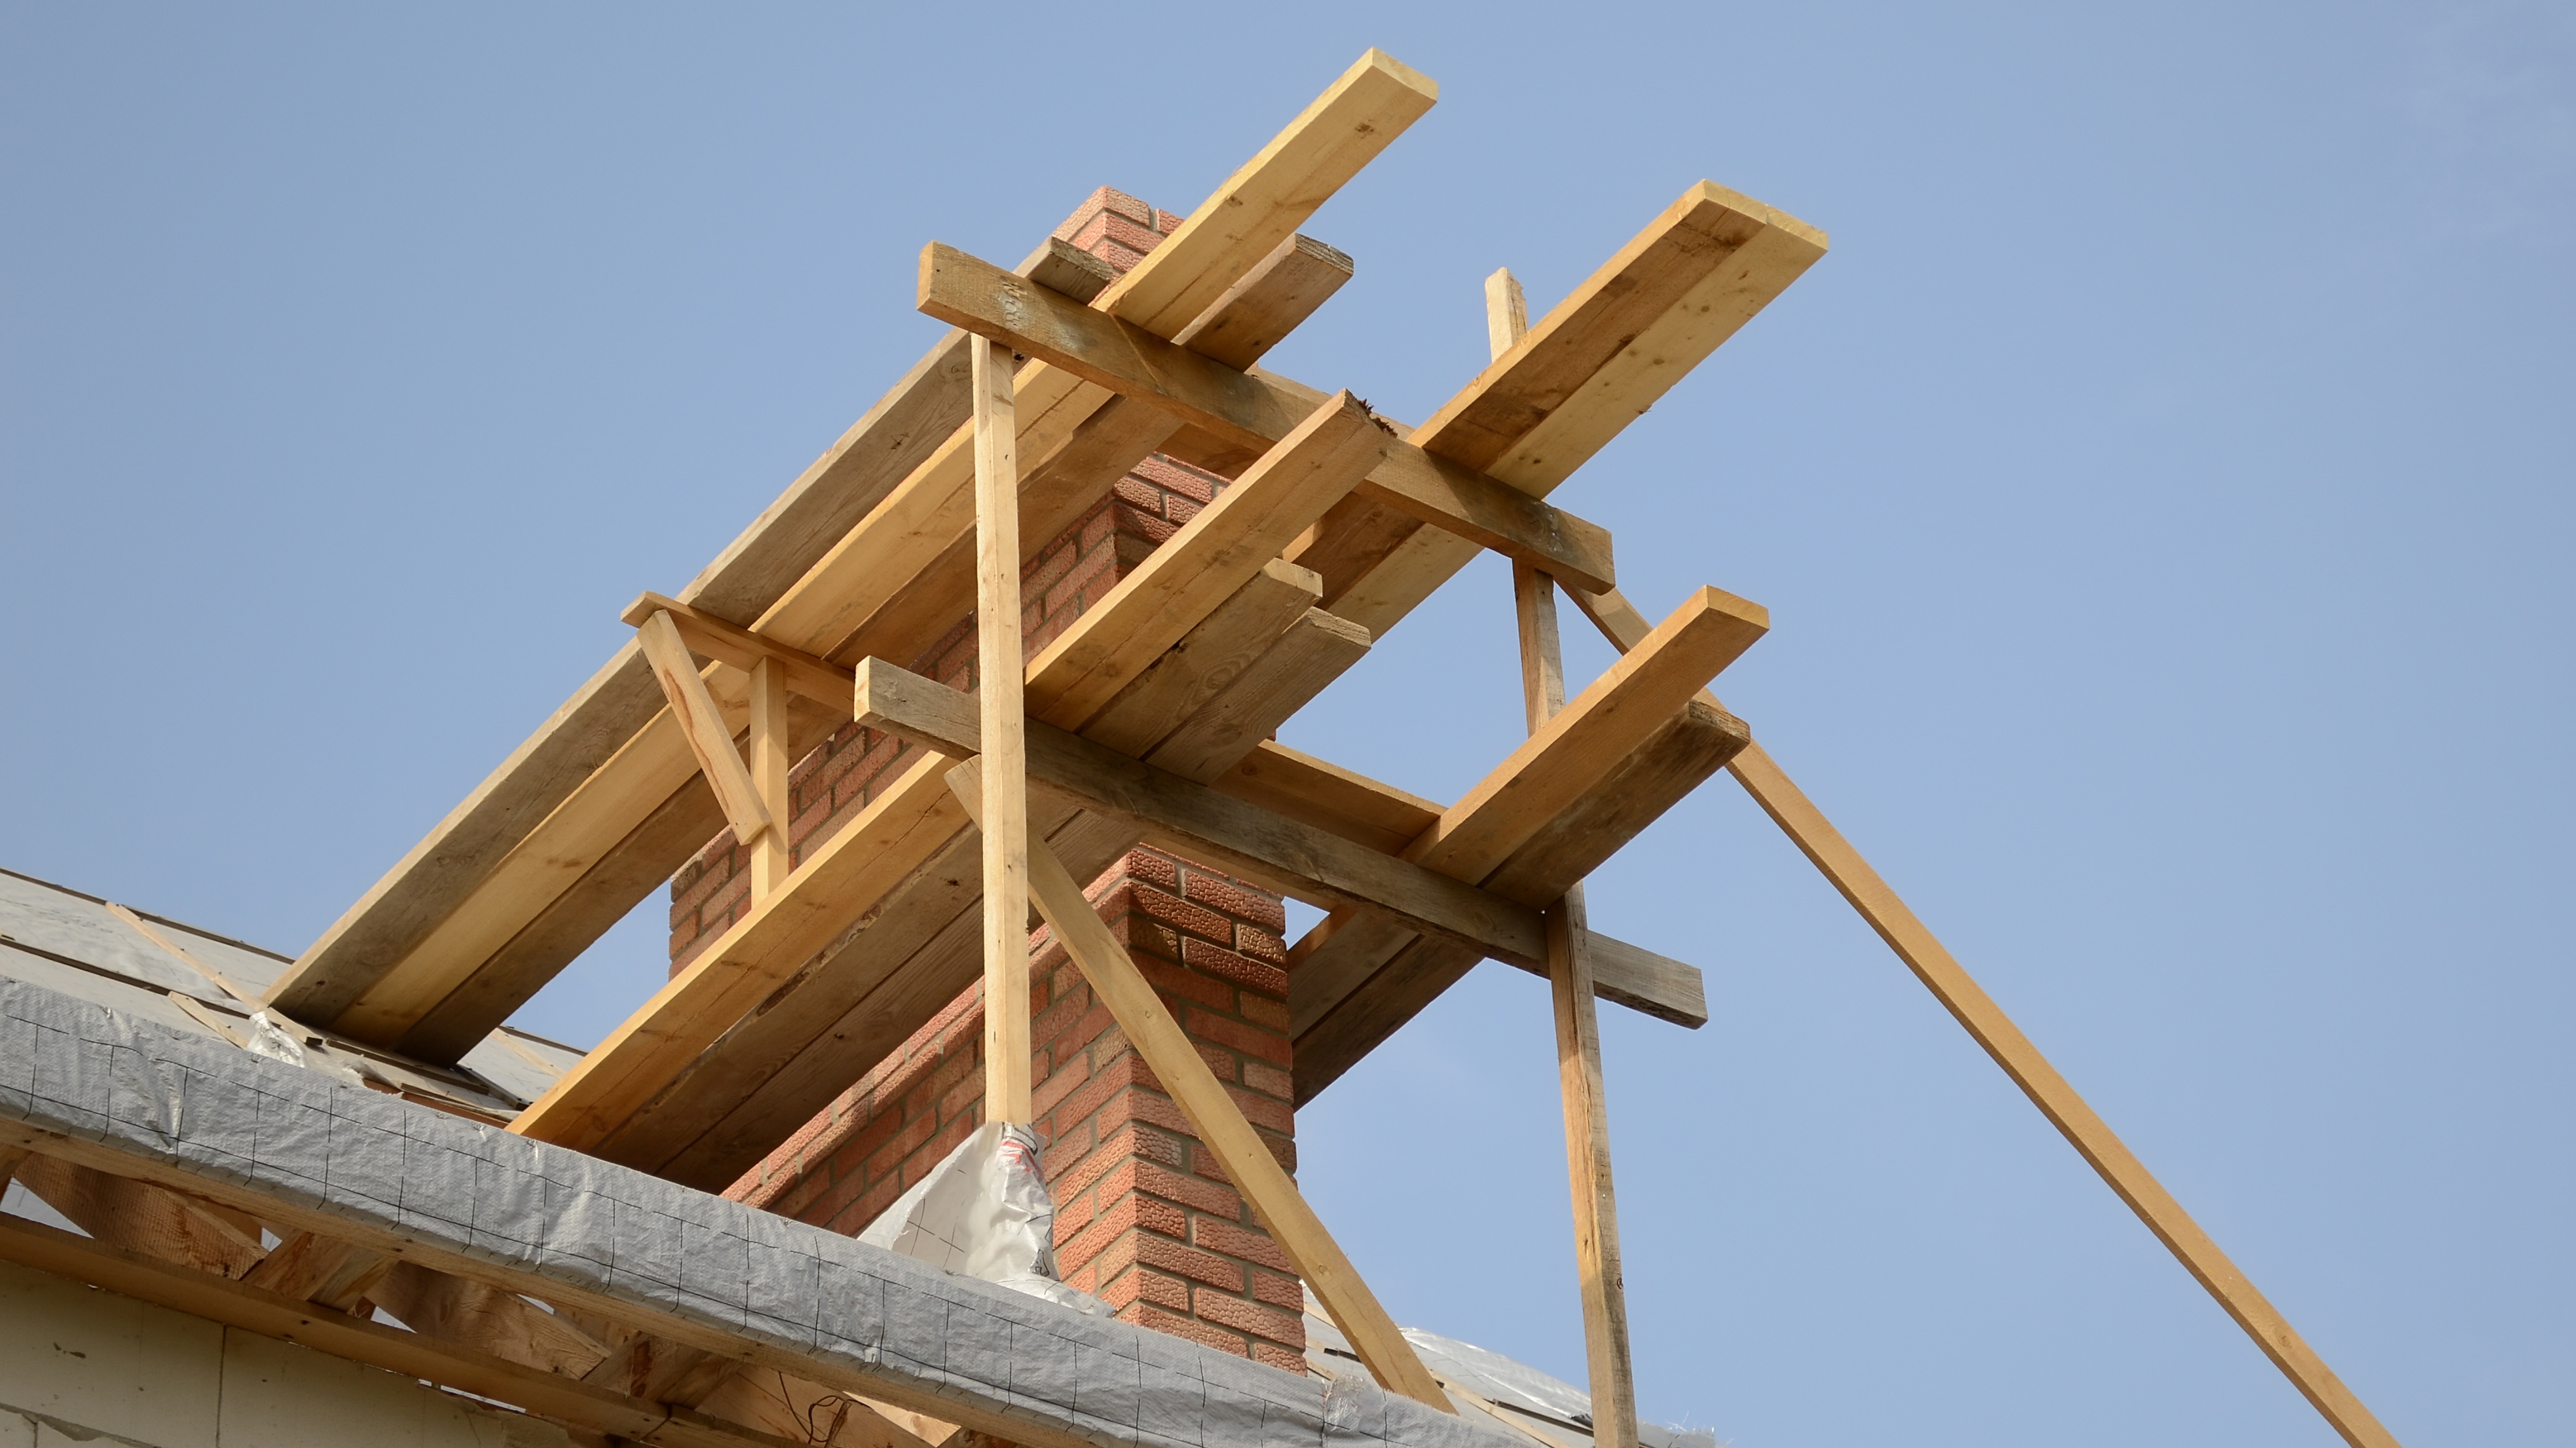 A chimney surrounded by wood scaffolding